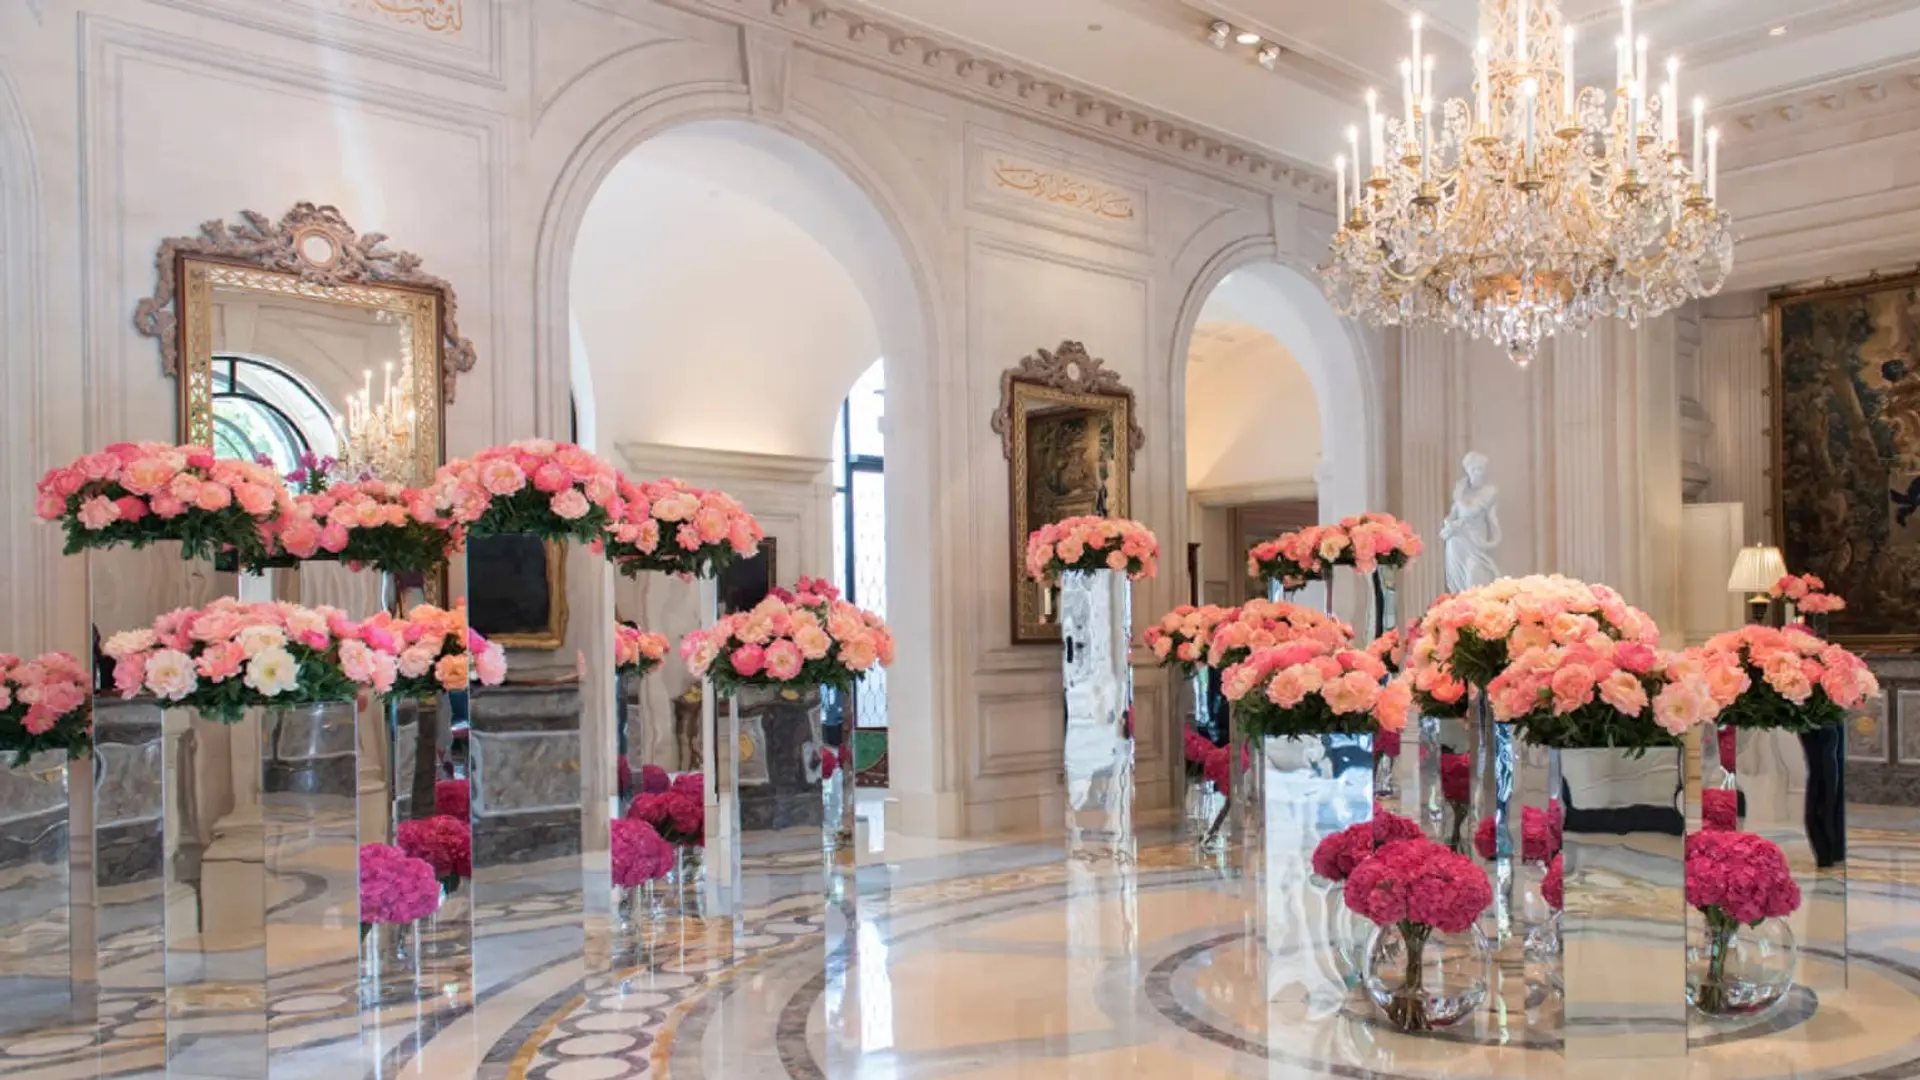 Hotel review Style' - Four Seasons Hotel George V Paris - 0